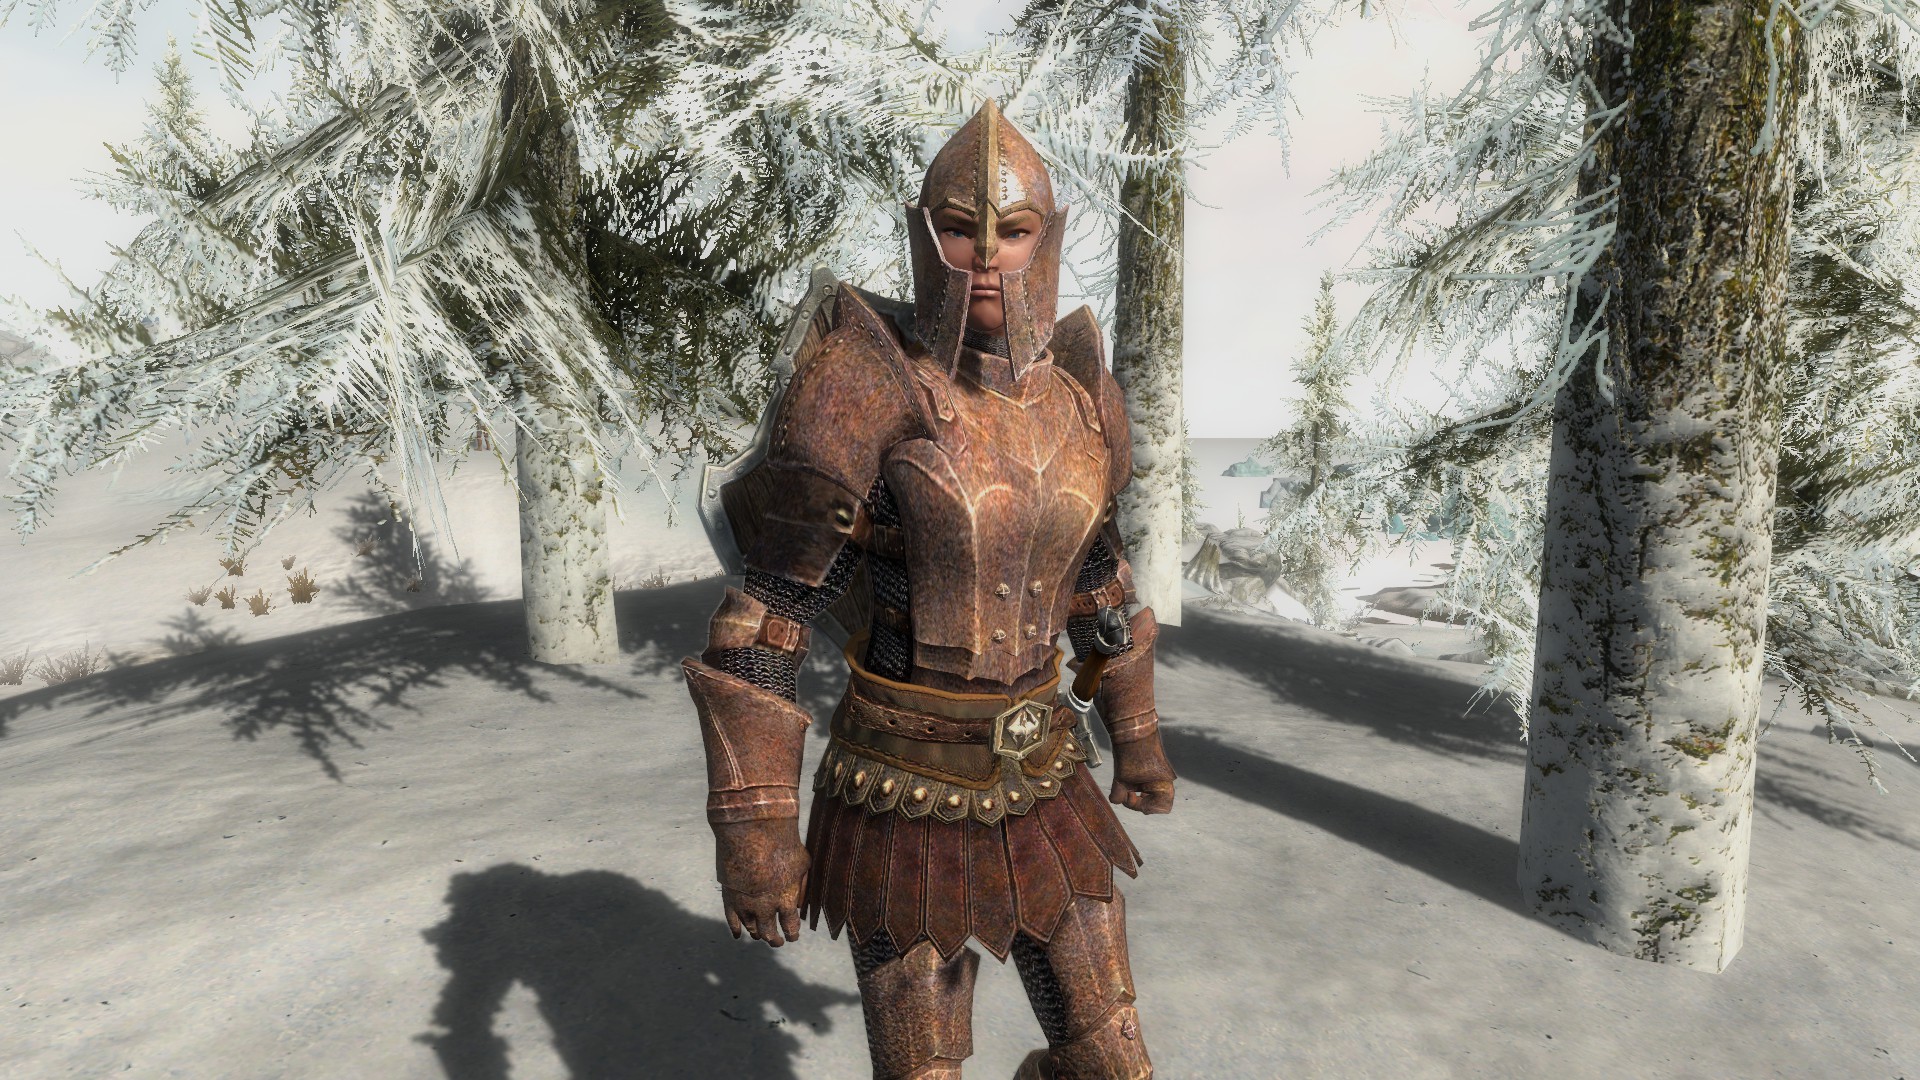 Imperial female legionnaire image - Weapons and Armors from Cyrodiil mod fo...